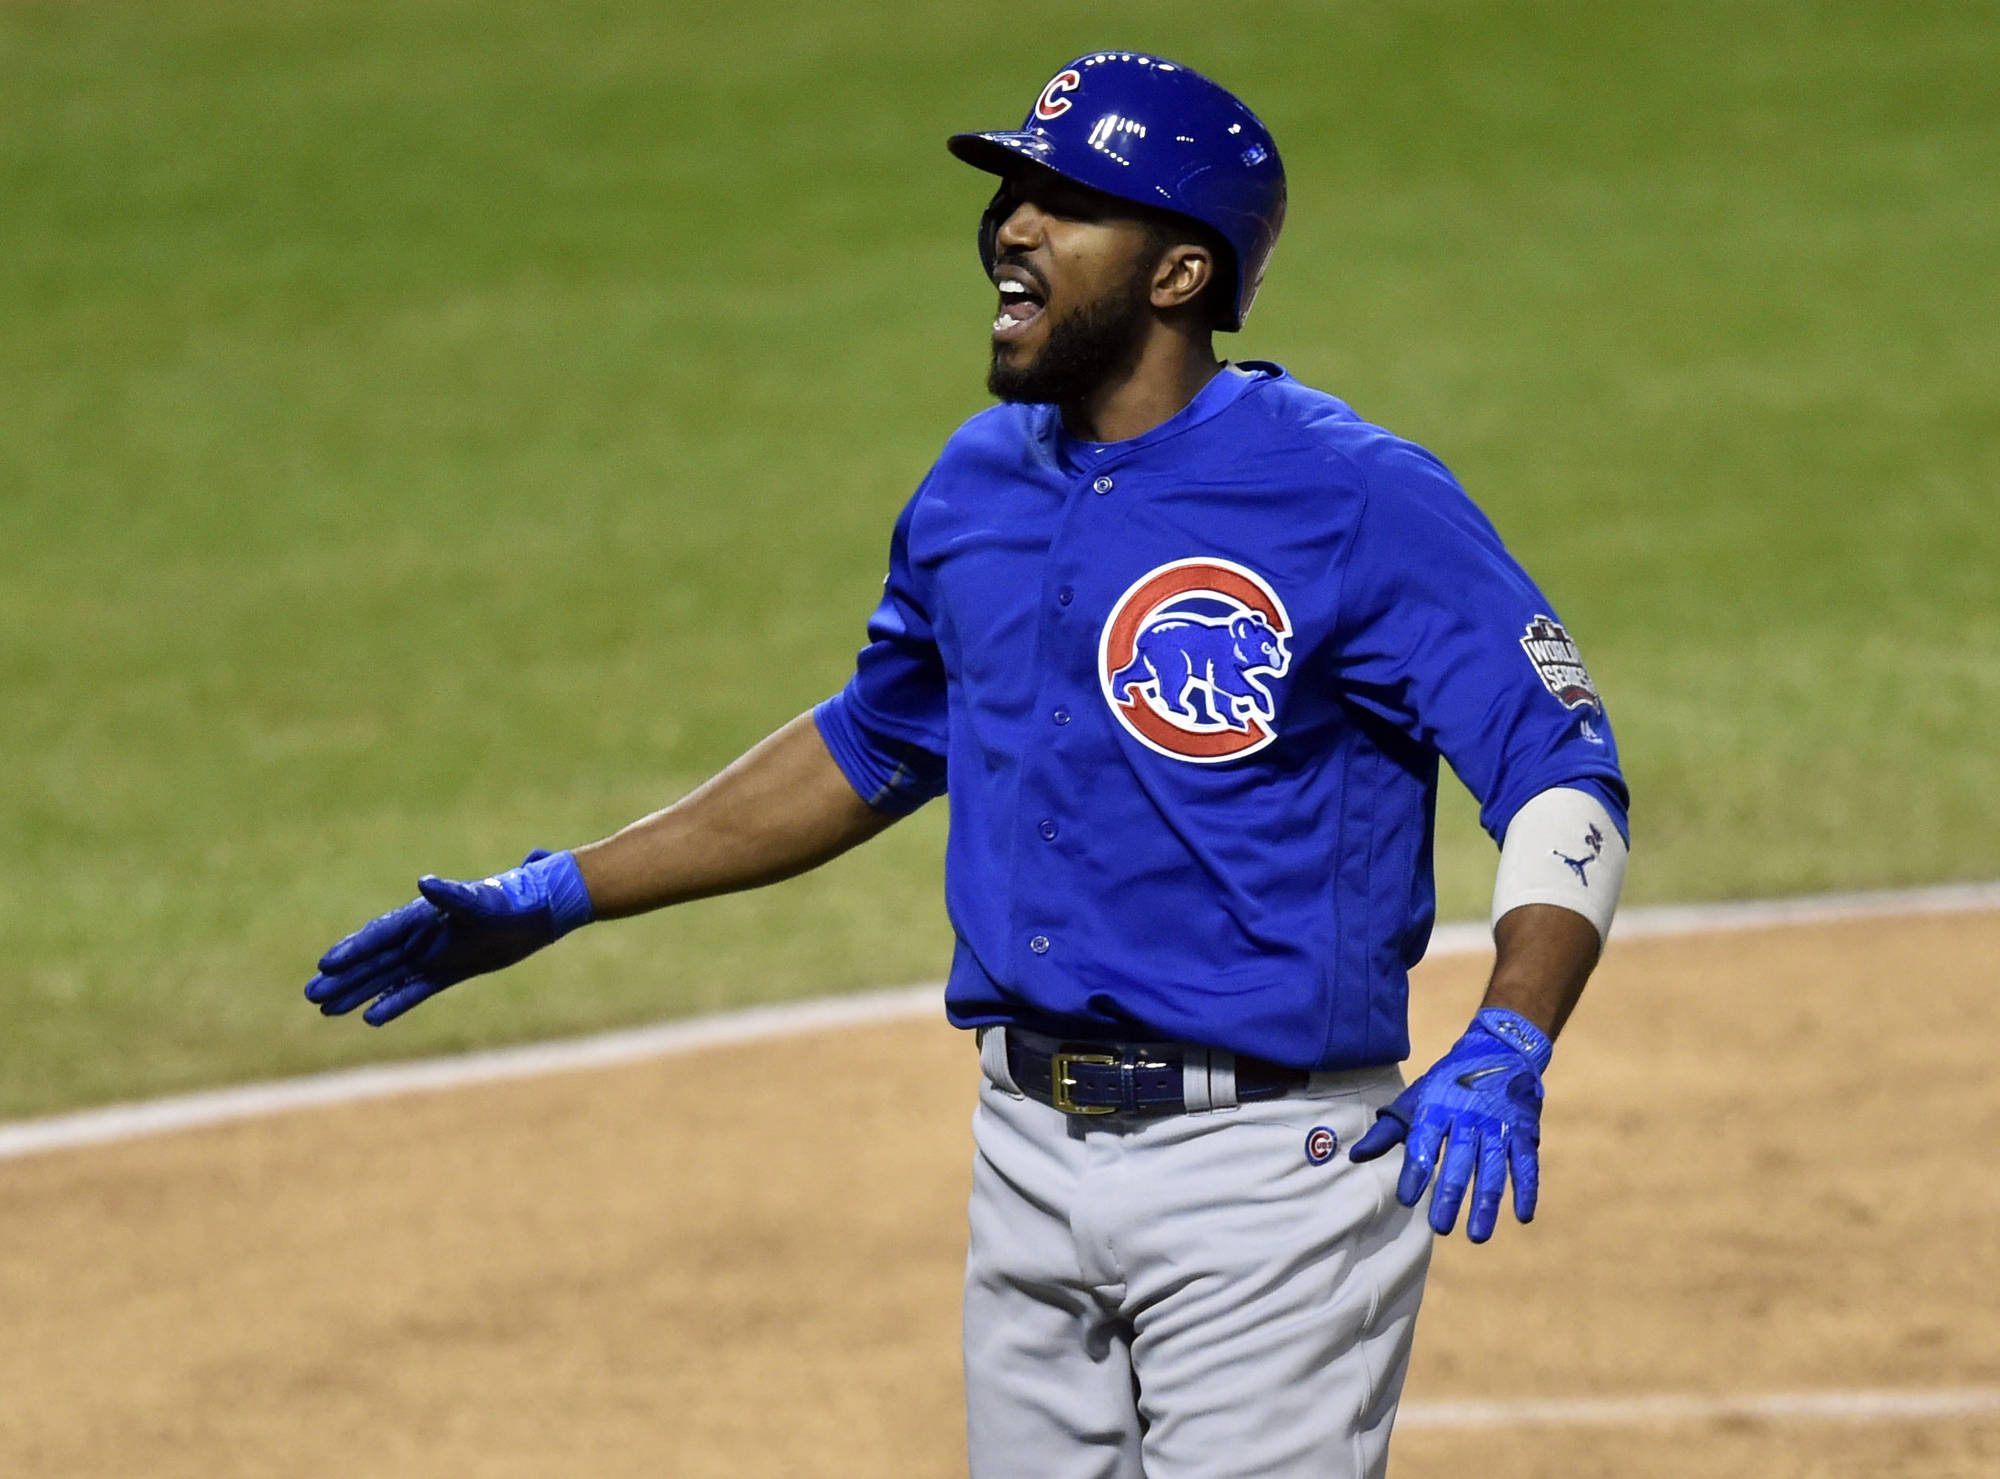 Will the Cubs re-sign Dexter Fowler?